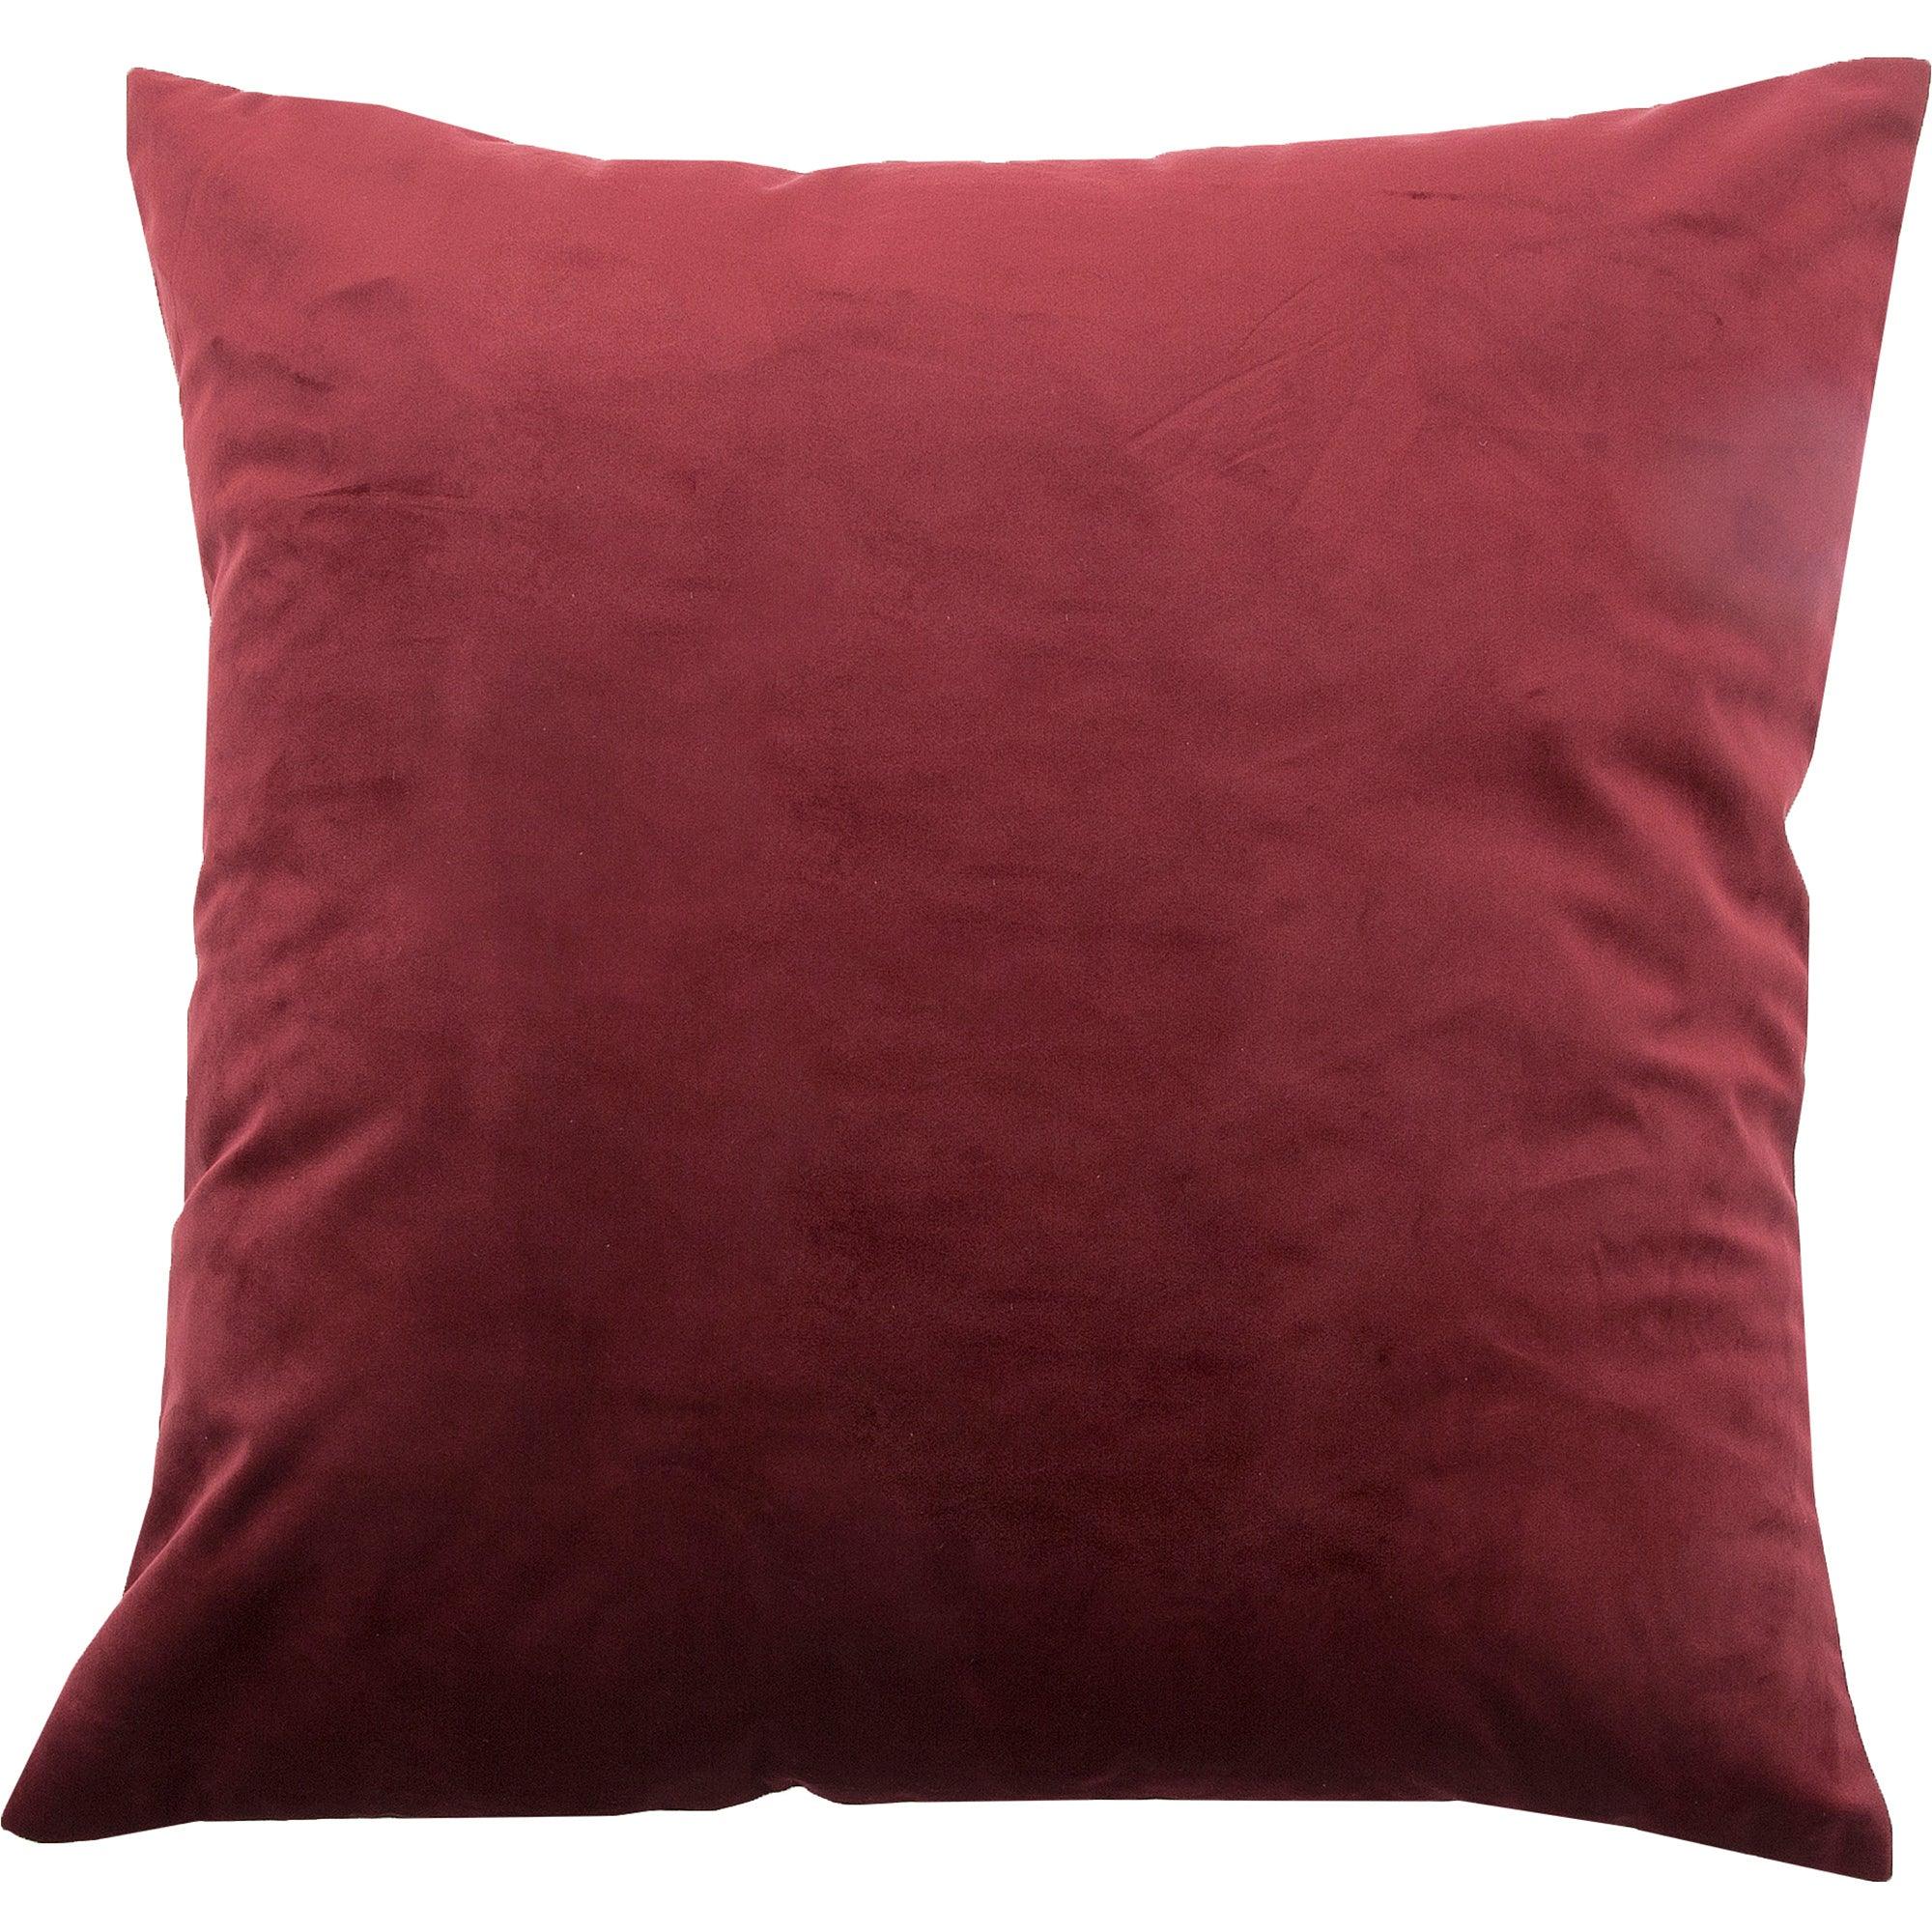 Montreal Lighting & Hardware - Scarlet Pillow by Renwil - Montreal Lighting & Hardware